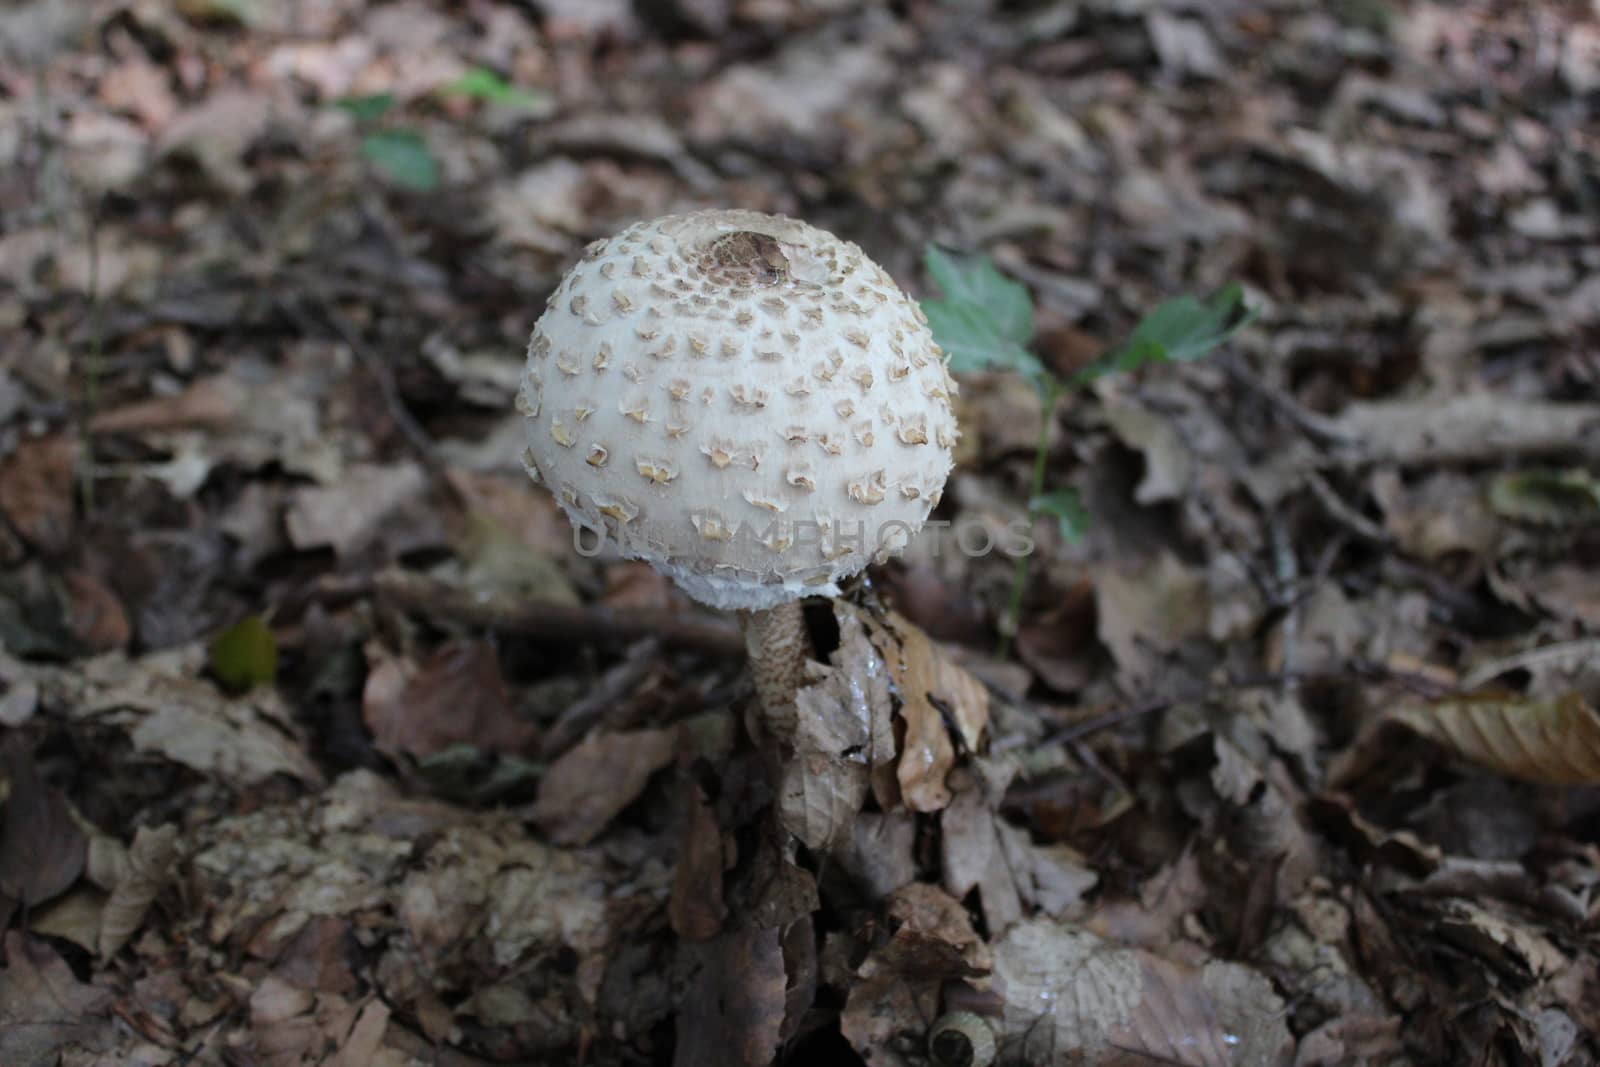 The picture shows a parasol mushroom in the autumn leaves.